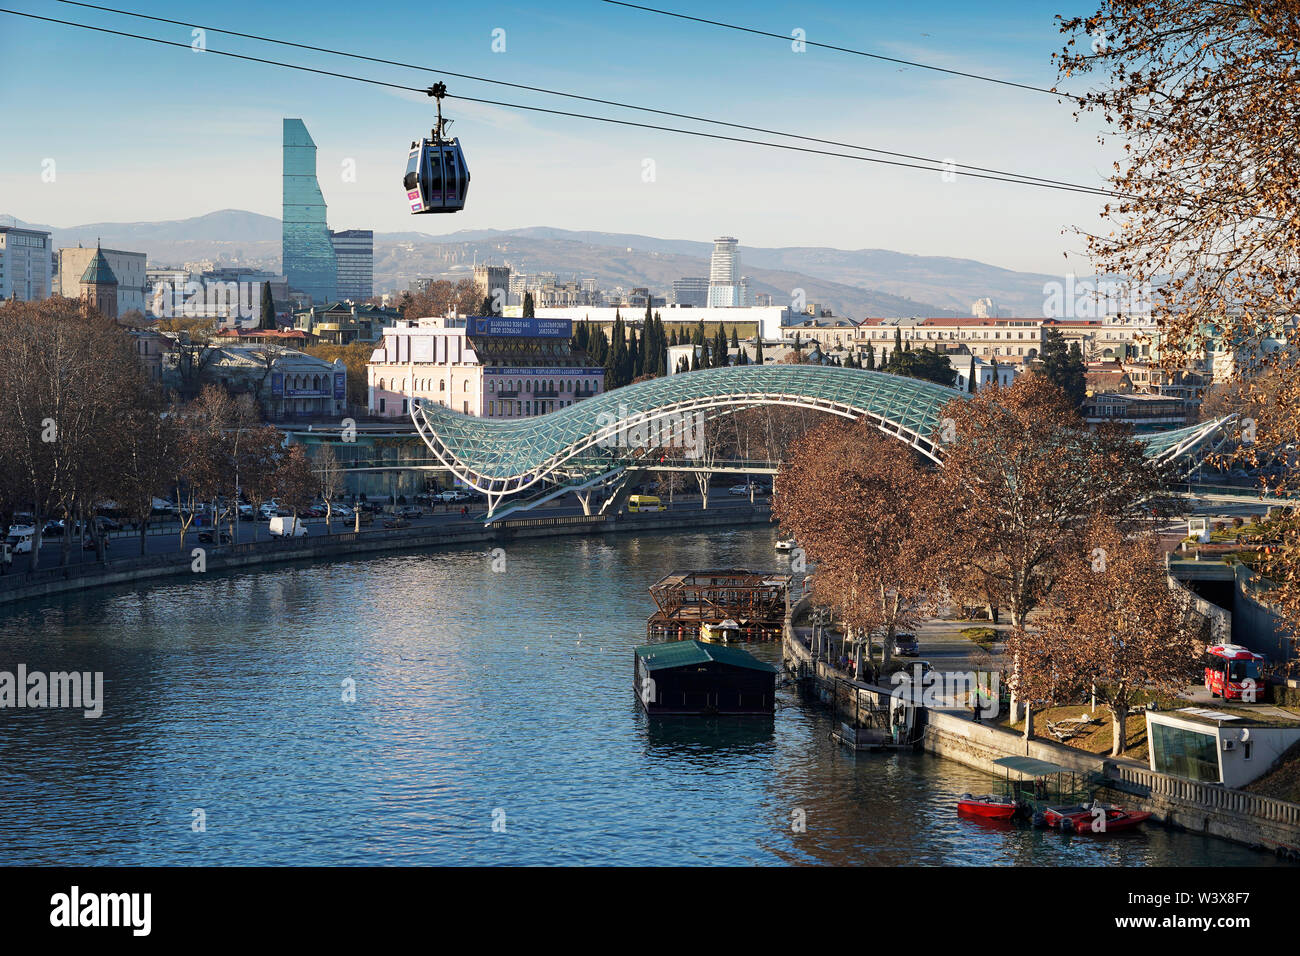 A cable car gondola hovers over the Mtkvari river. In the background: The Bridge of Peace from Michele De Lucchi. Downtown Tbilisi, Georgia, Caucasia Stock Photo